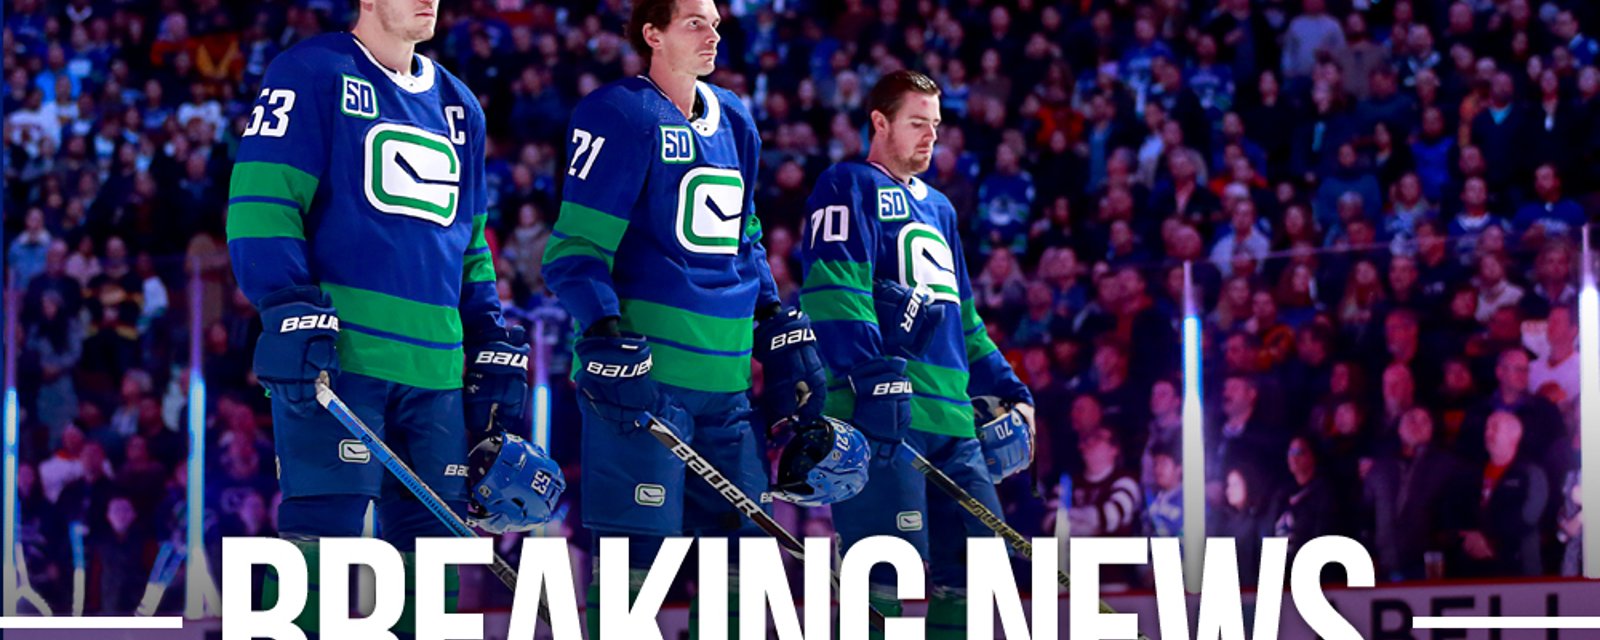 NHL officially suspends Canucks' return to play